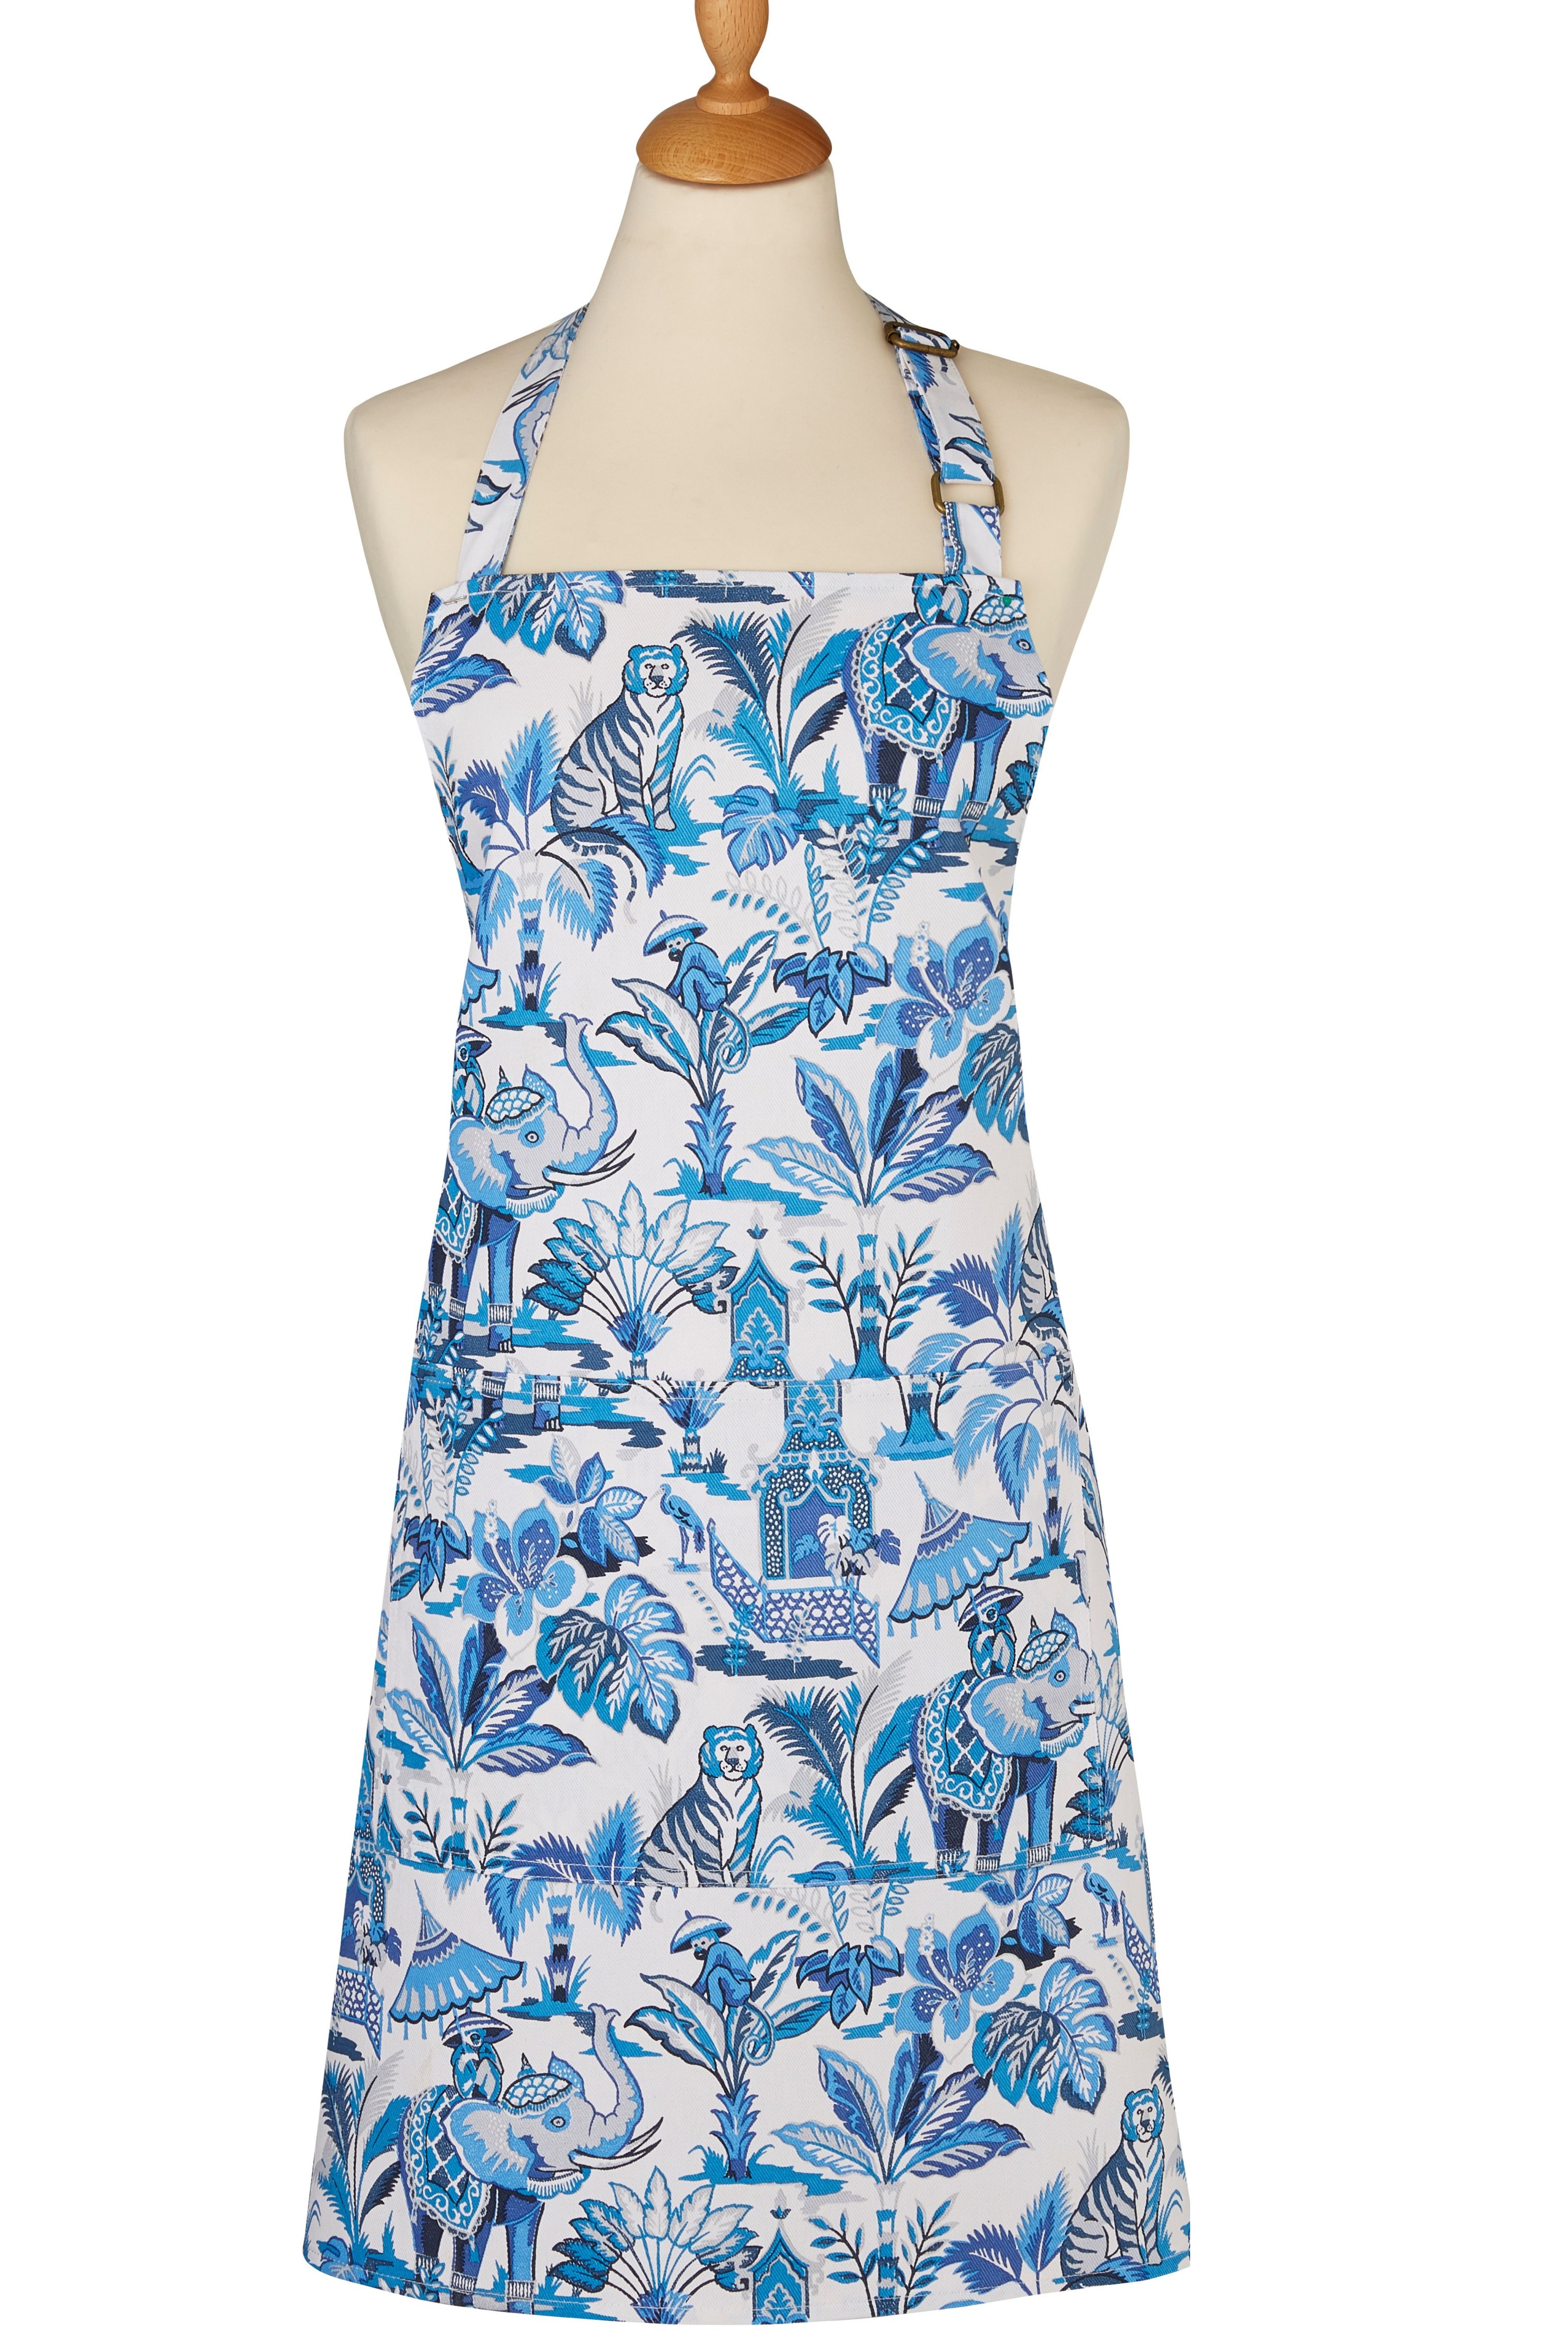 Ulster Weaver's Cotton Apron India Blue